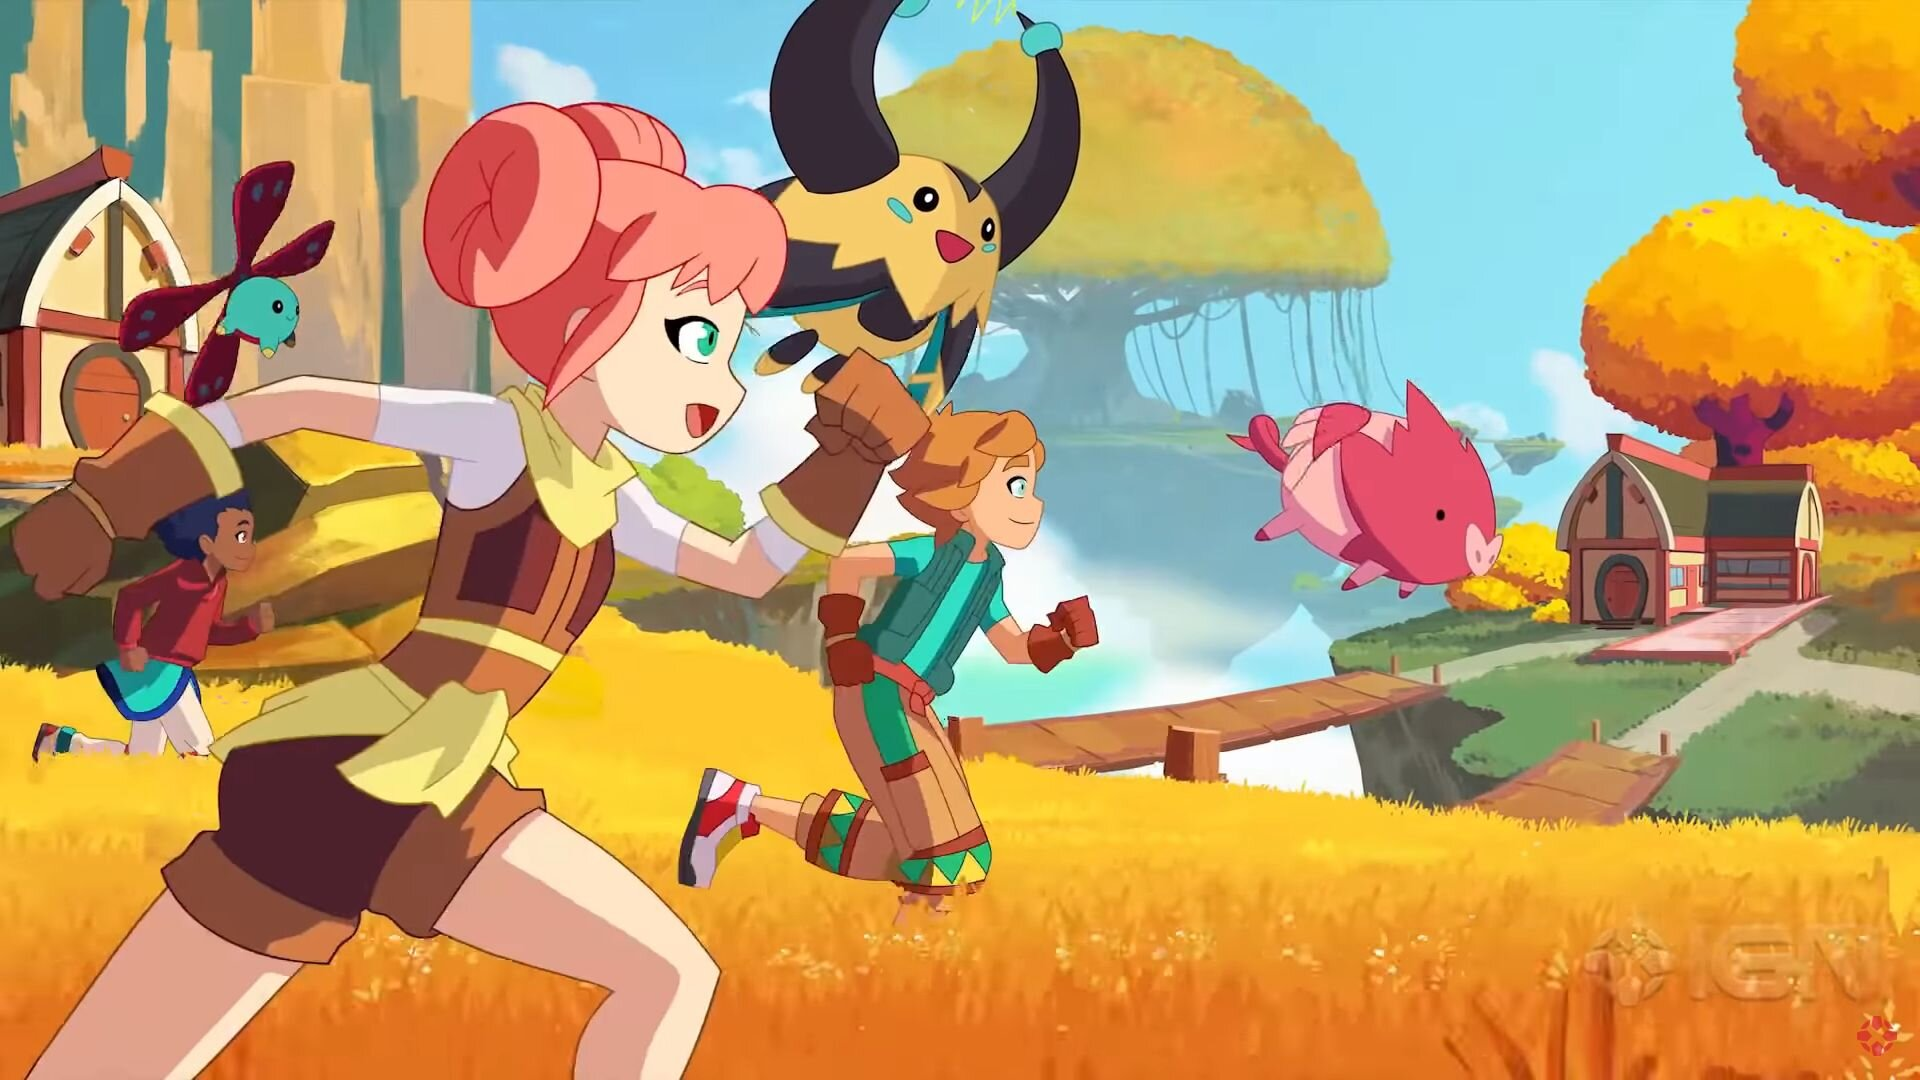 Temtem Console Release Date Coming in Spring 2021